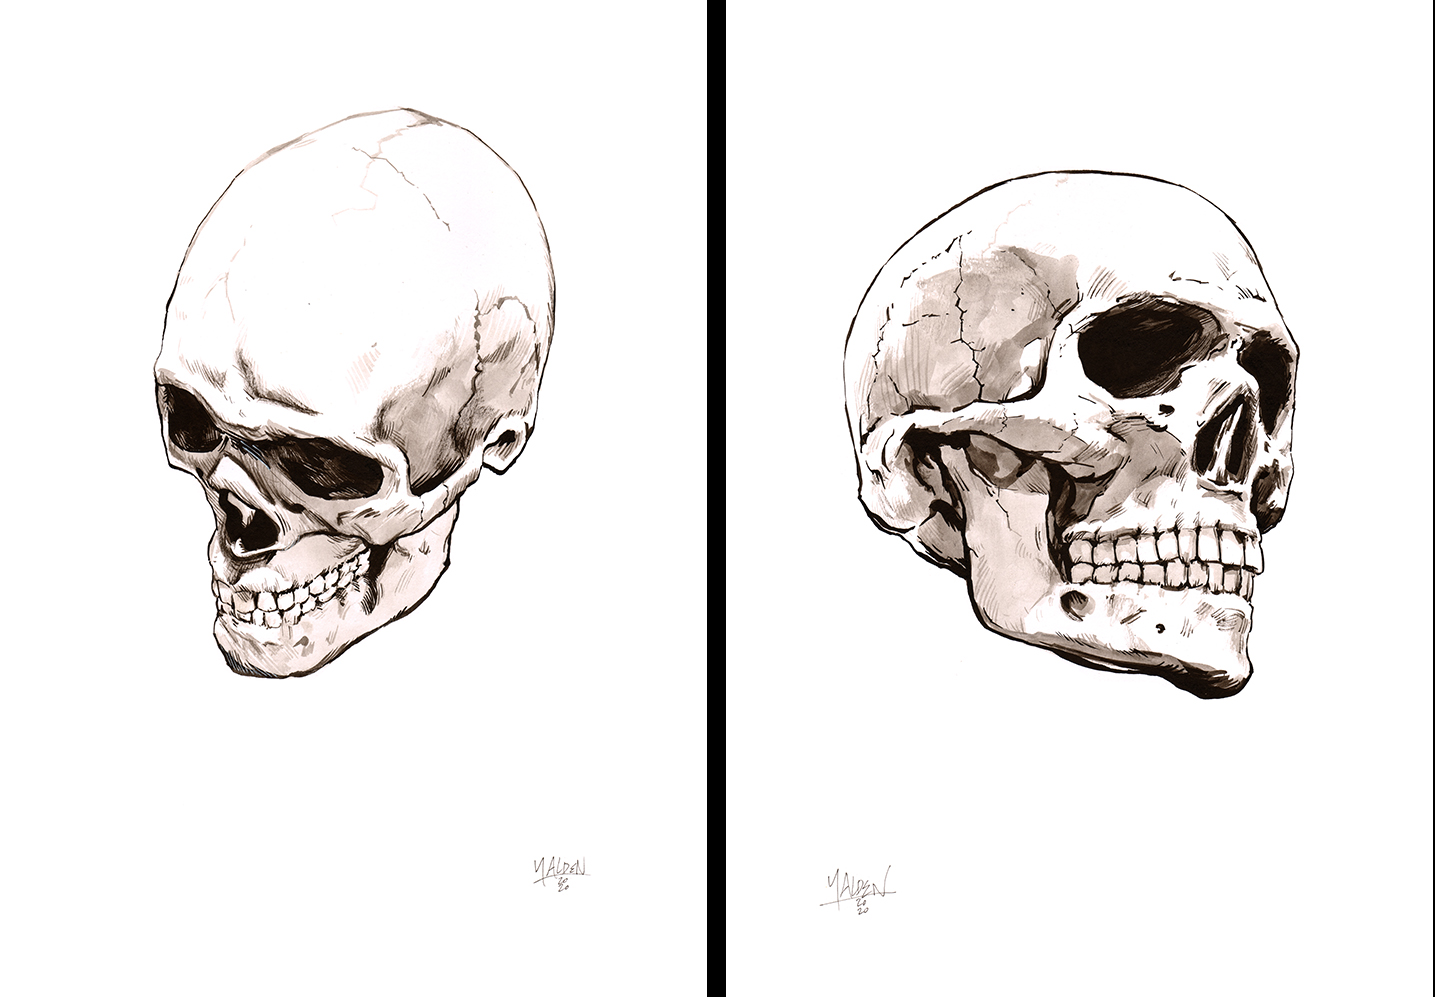 Skull_01and02